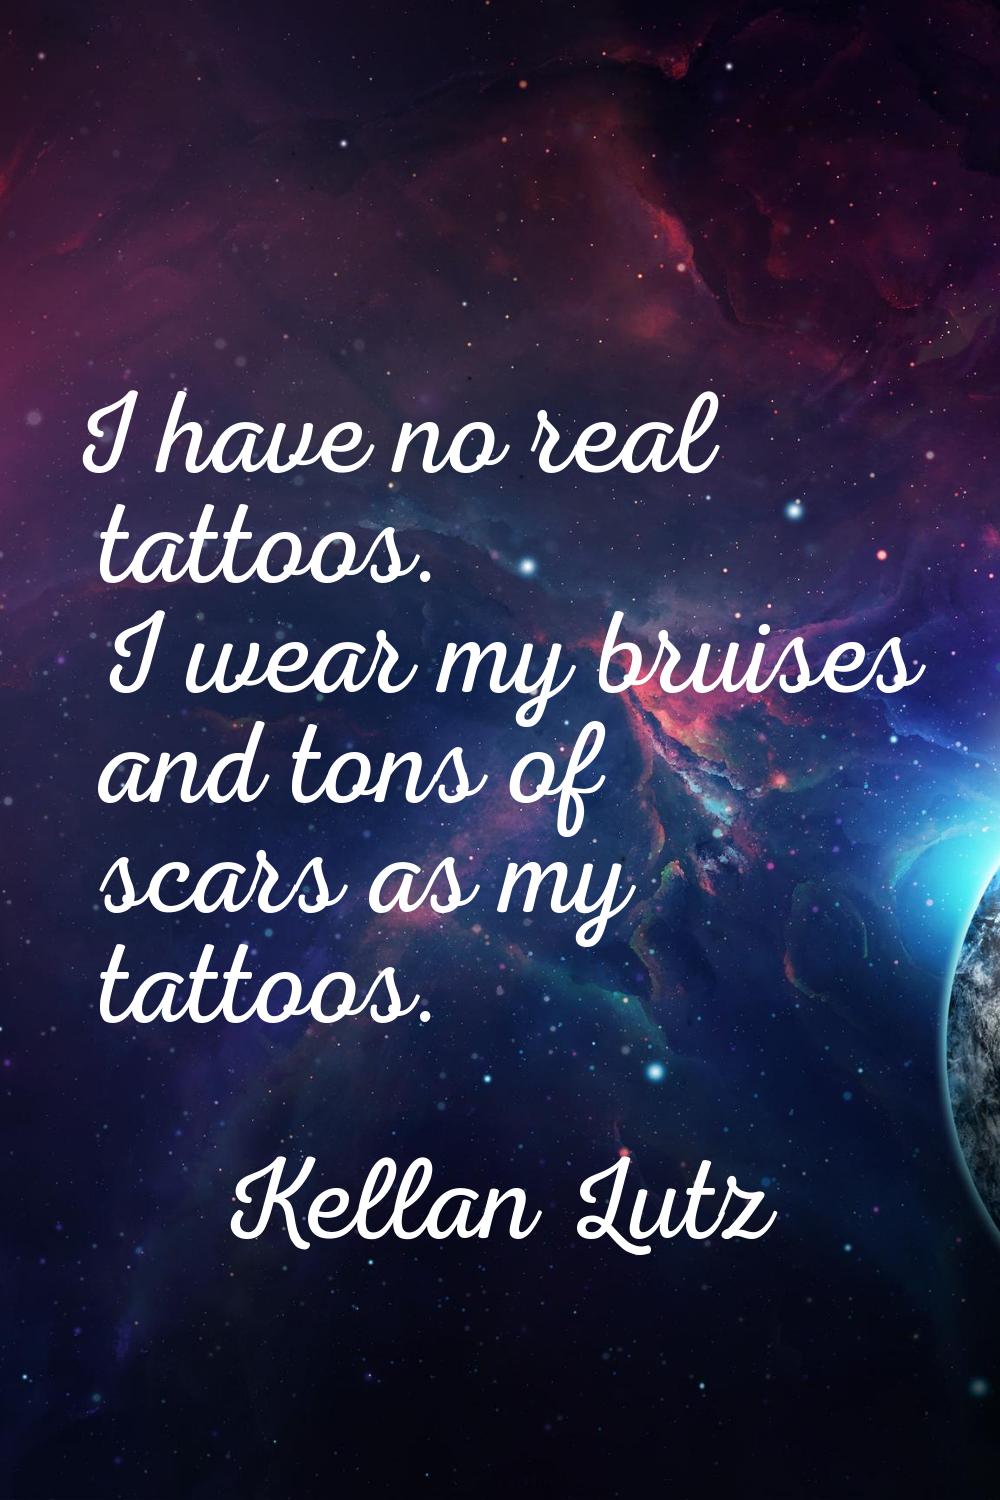 I have no real tattoos. I wear my bruises and tons of scars as my tattoos.